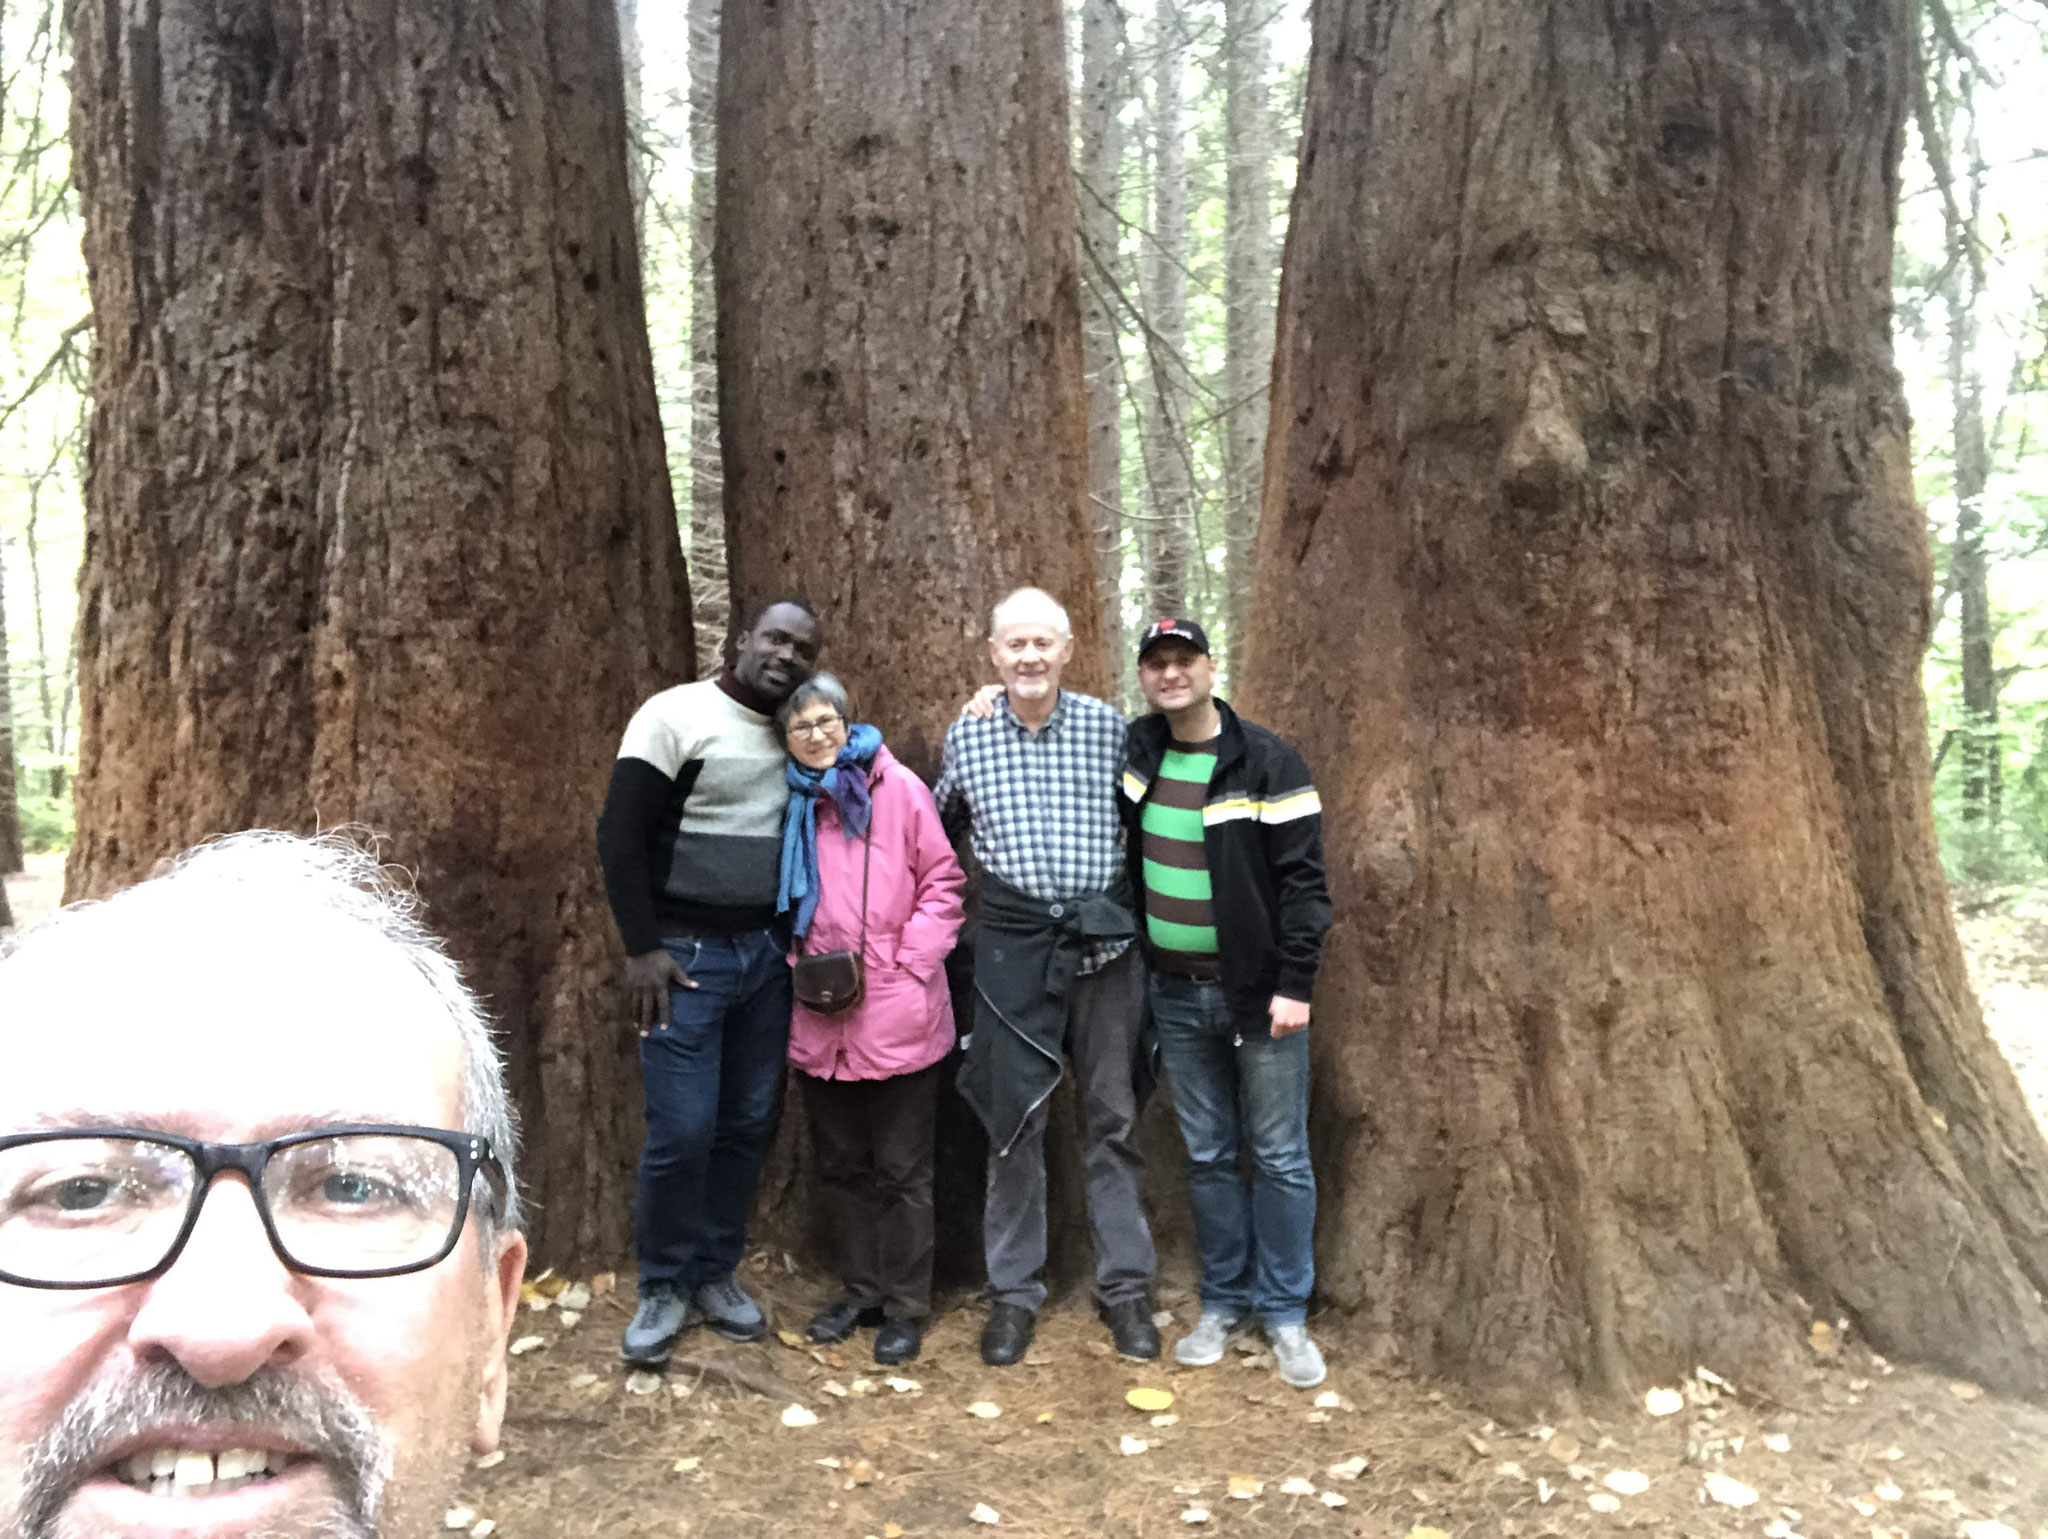 The team from Germany who did some touring with Jerry. These are the giant sequoias near Kyustendil. 